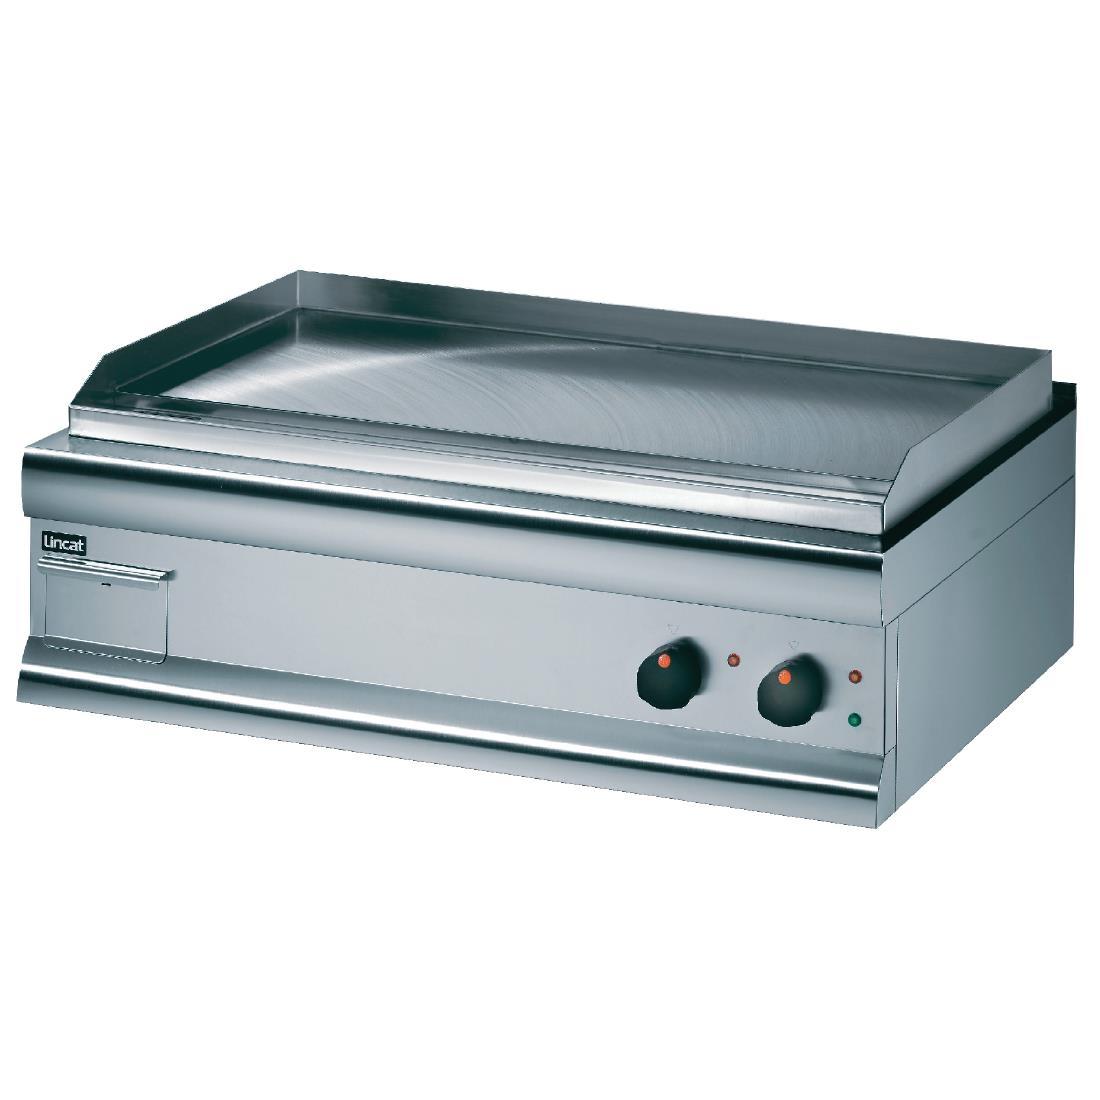 Lincat Silverlink 600 Machined Steel Dual zone Electric Griddle GS9 - E319  - 1